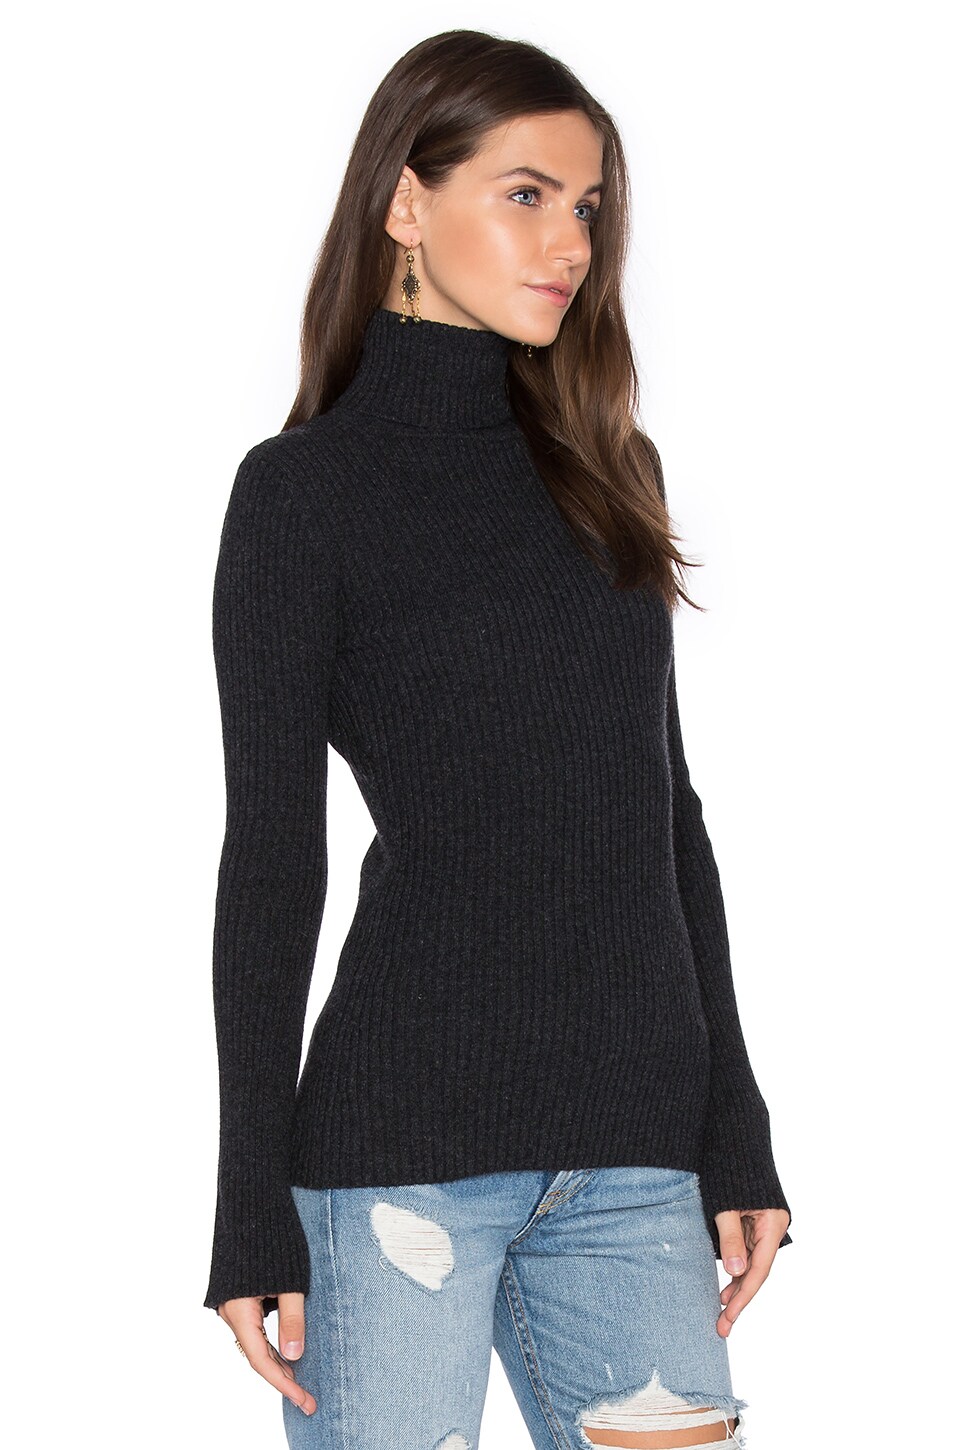 Autumn Cashmere x REVOLVE Ribbed Turtleneck Bell Sleeve Sweater in Lead ...